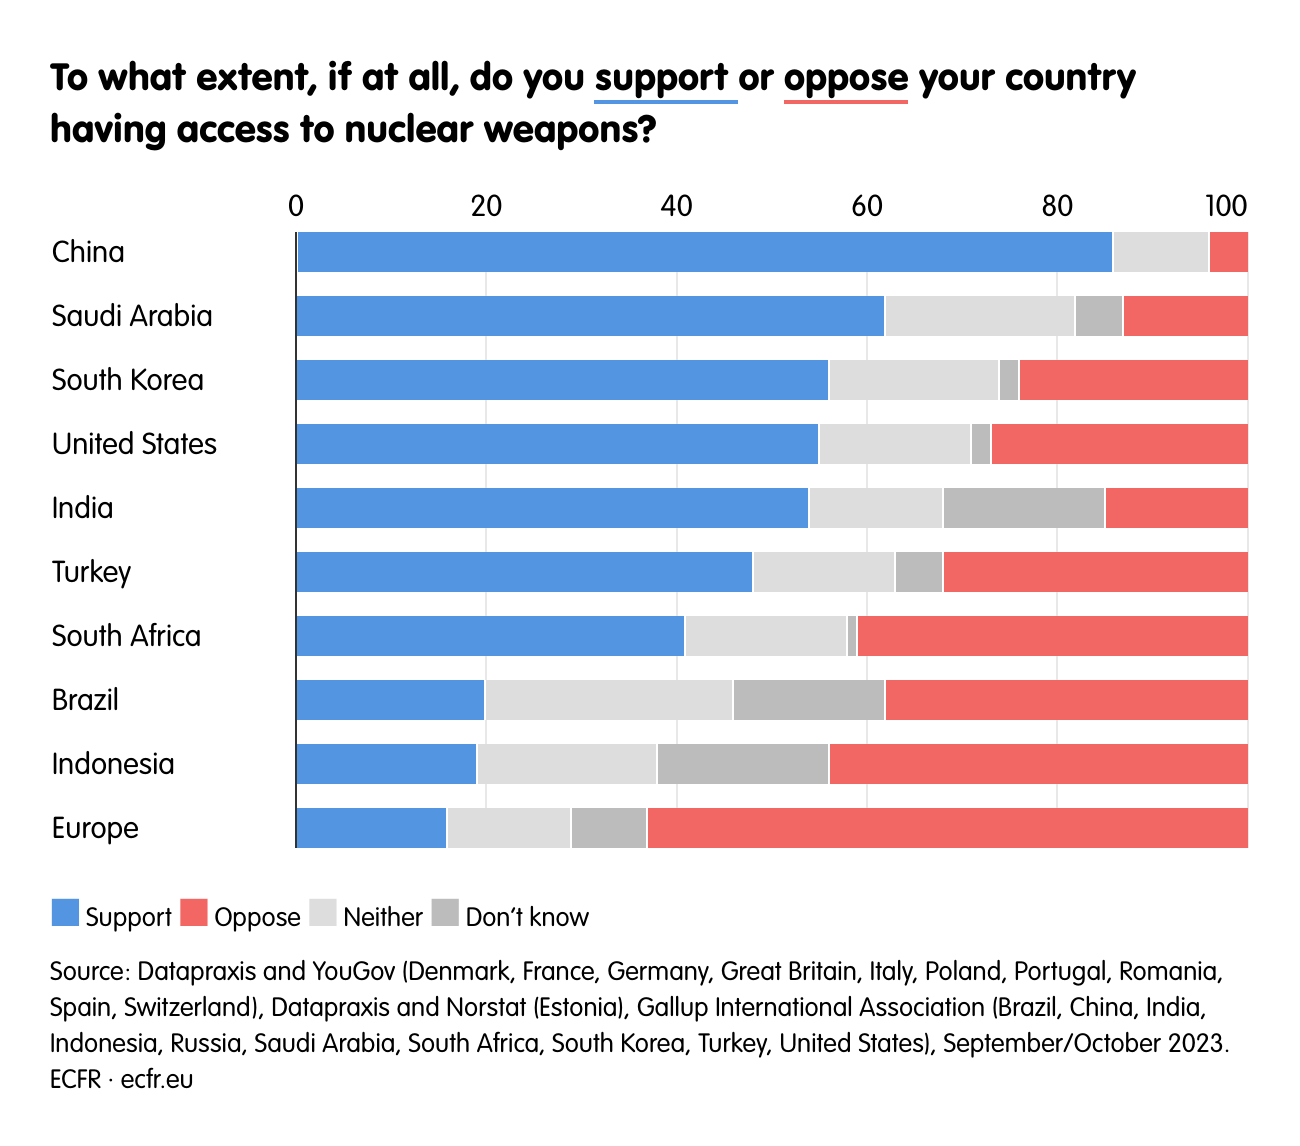 To what extent, if at all, do you support  or oppose your country having access to nuclear weapons?